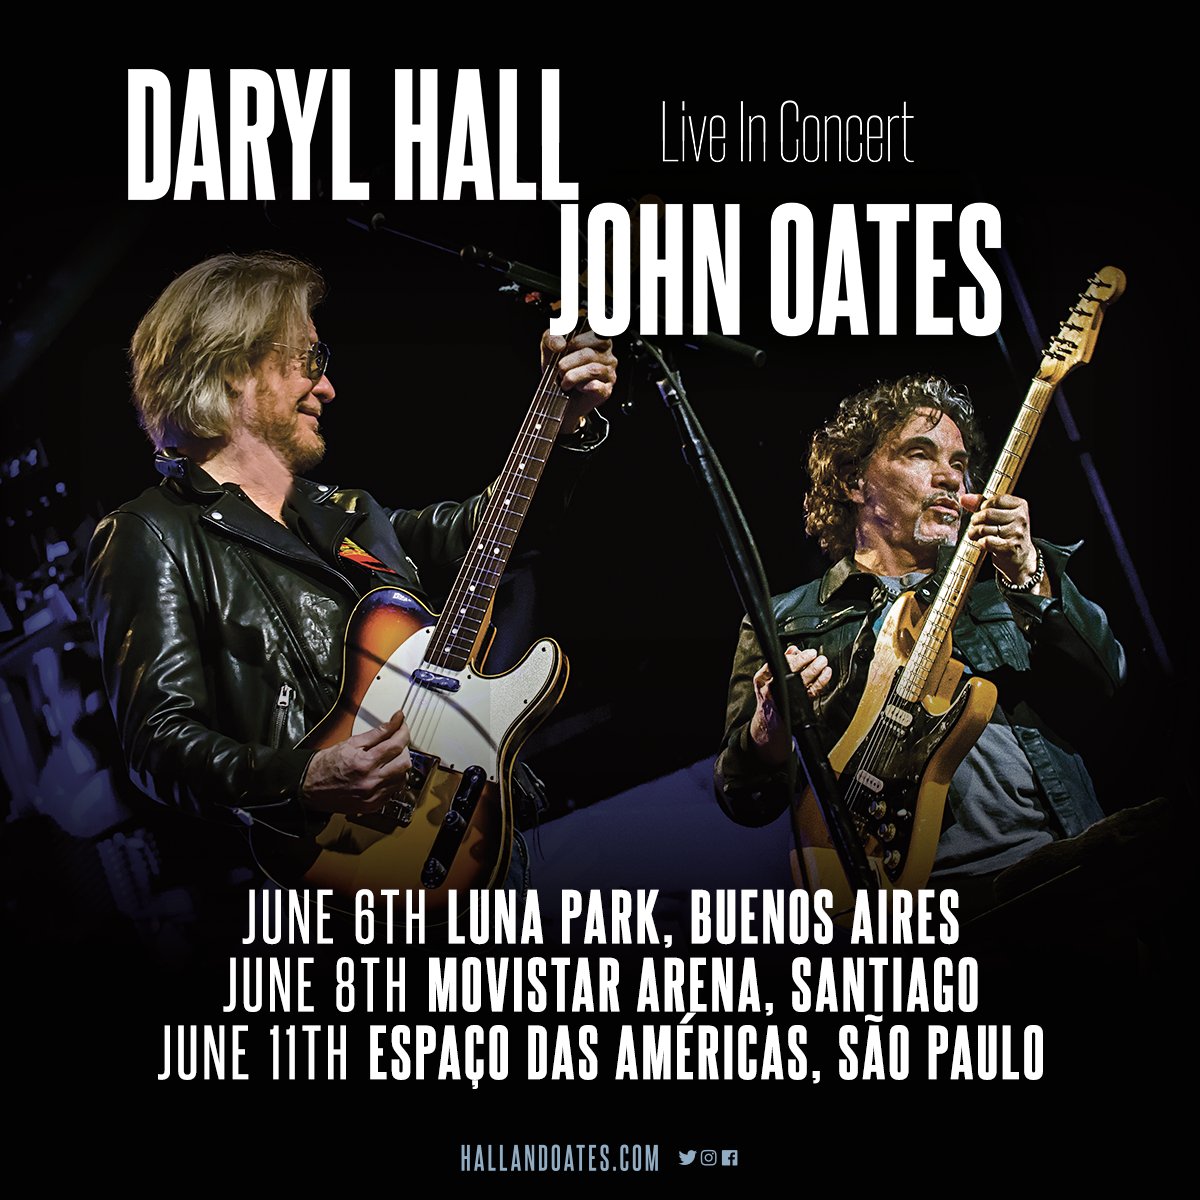 DARYL HALL AND JOHN OATES TO PERFORM FIRSTEVER TOUR DATES IN SOUTH